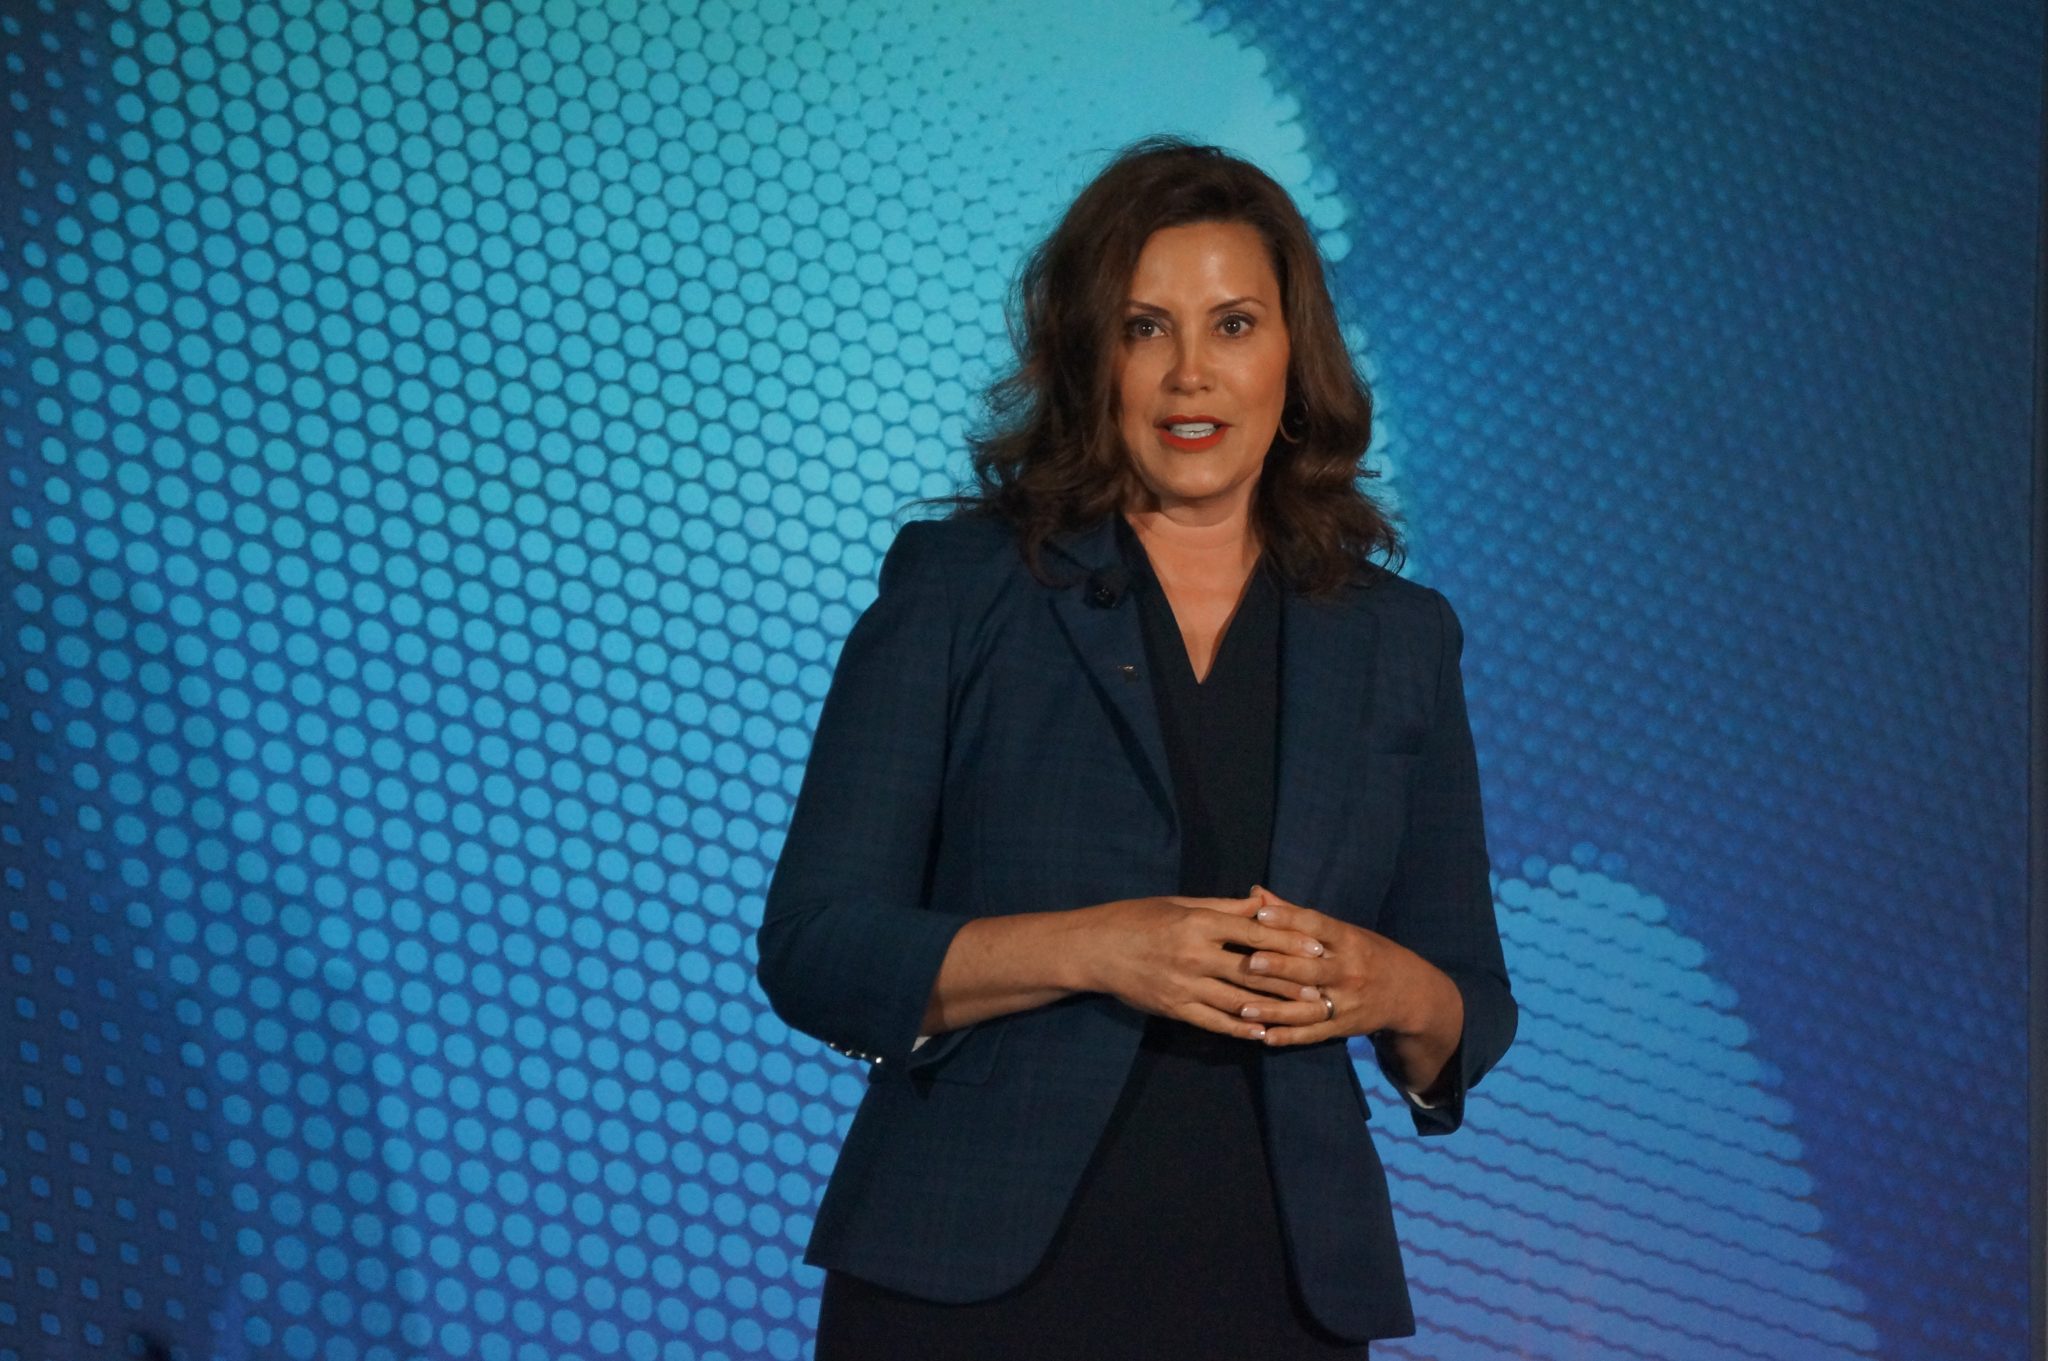 Gov. Gretchen Whitmer has signed an executive directive to use the example and economic power of the state to encourage the transition to zero-emission vehicles.